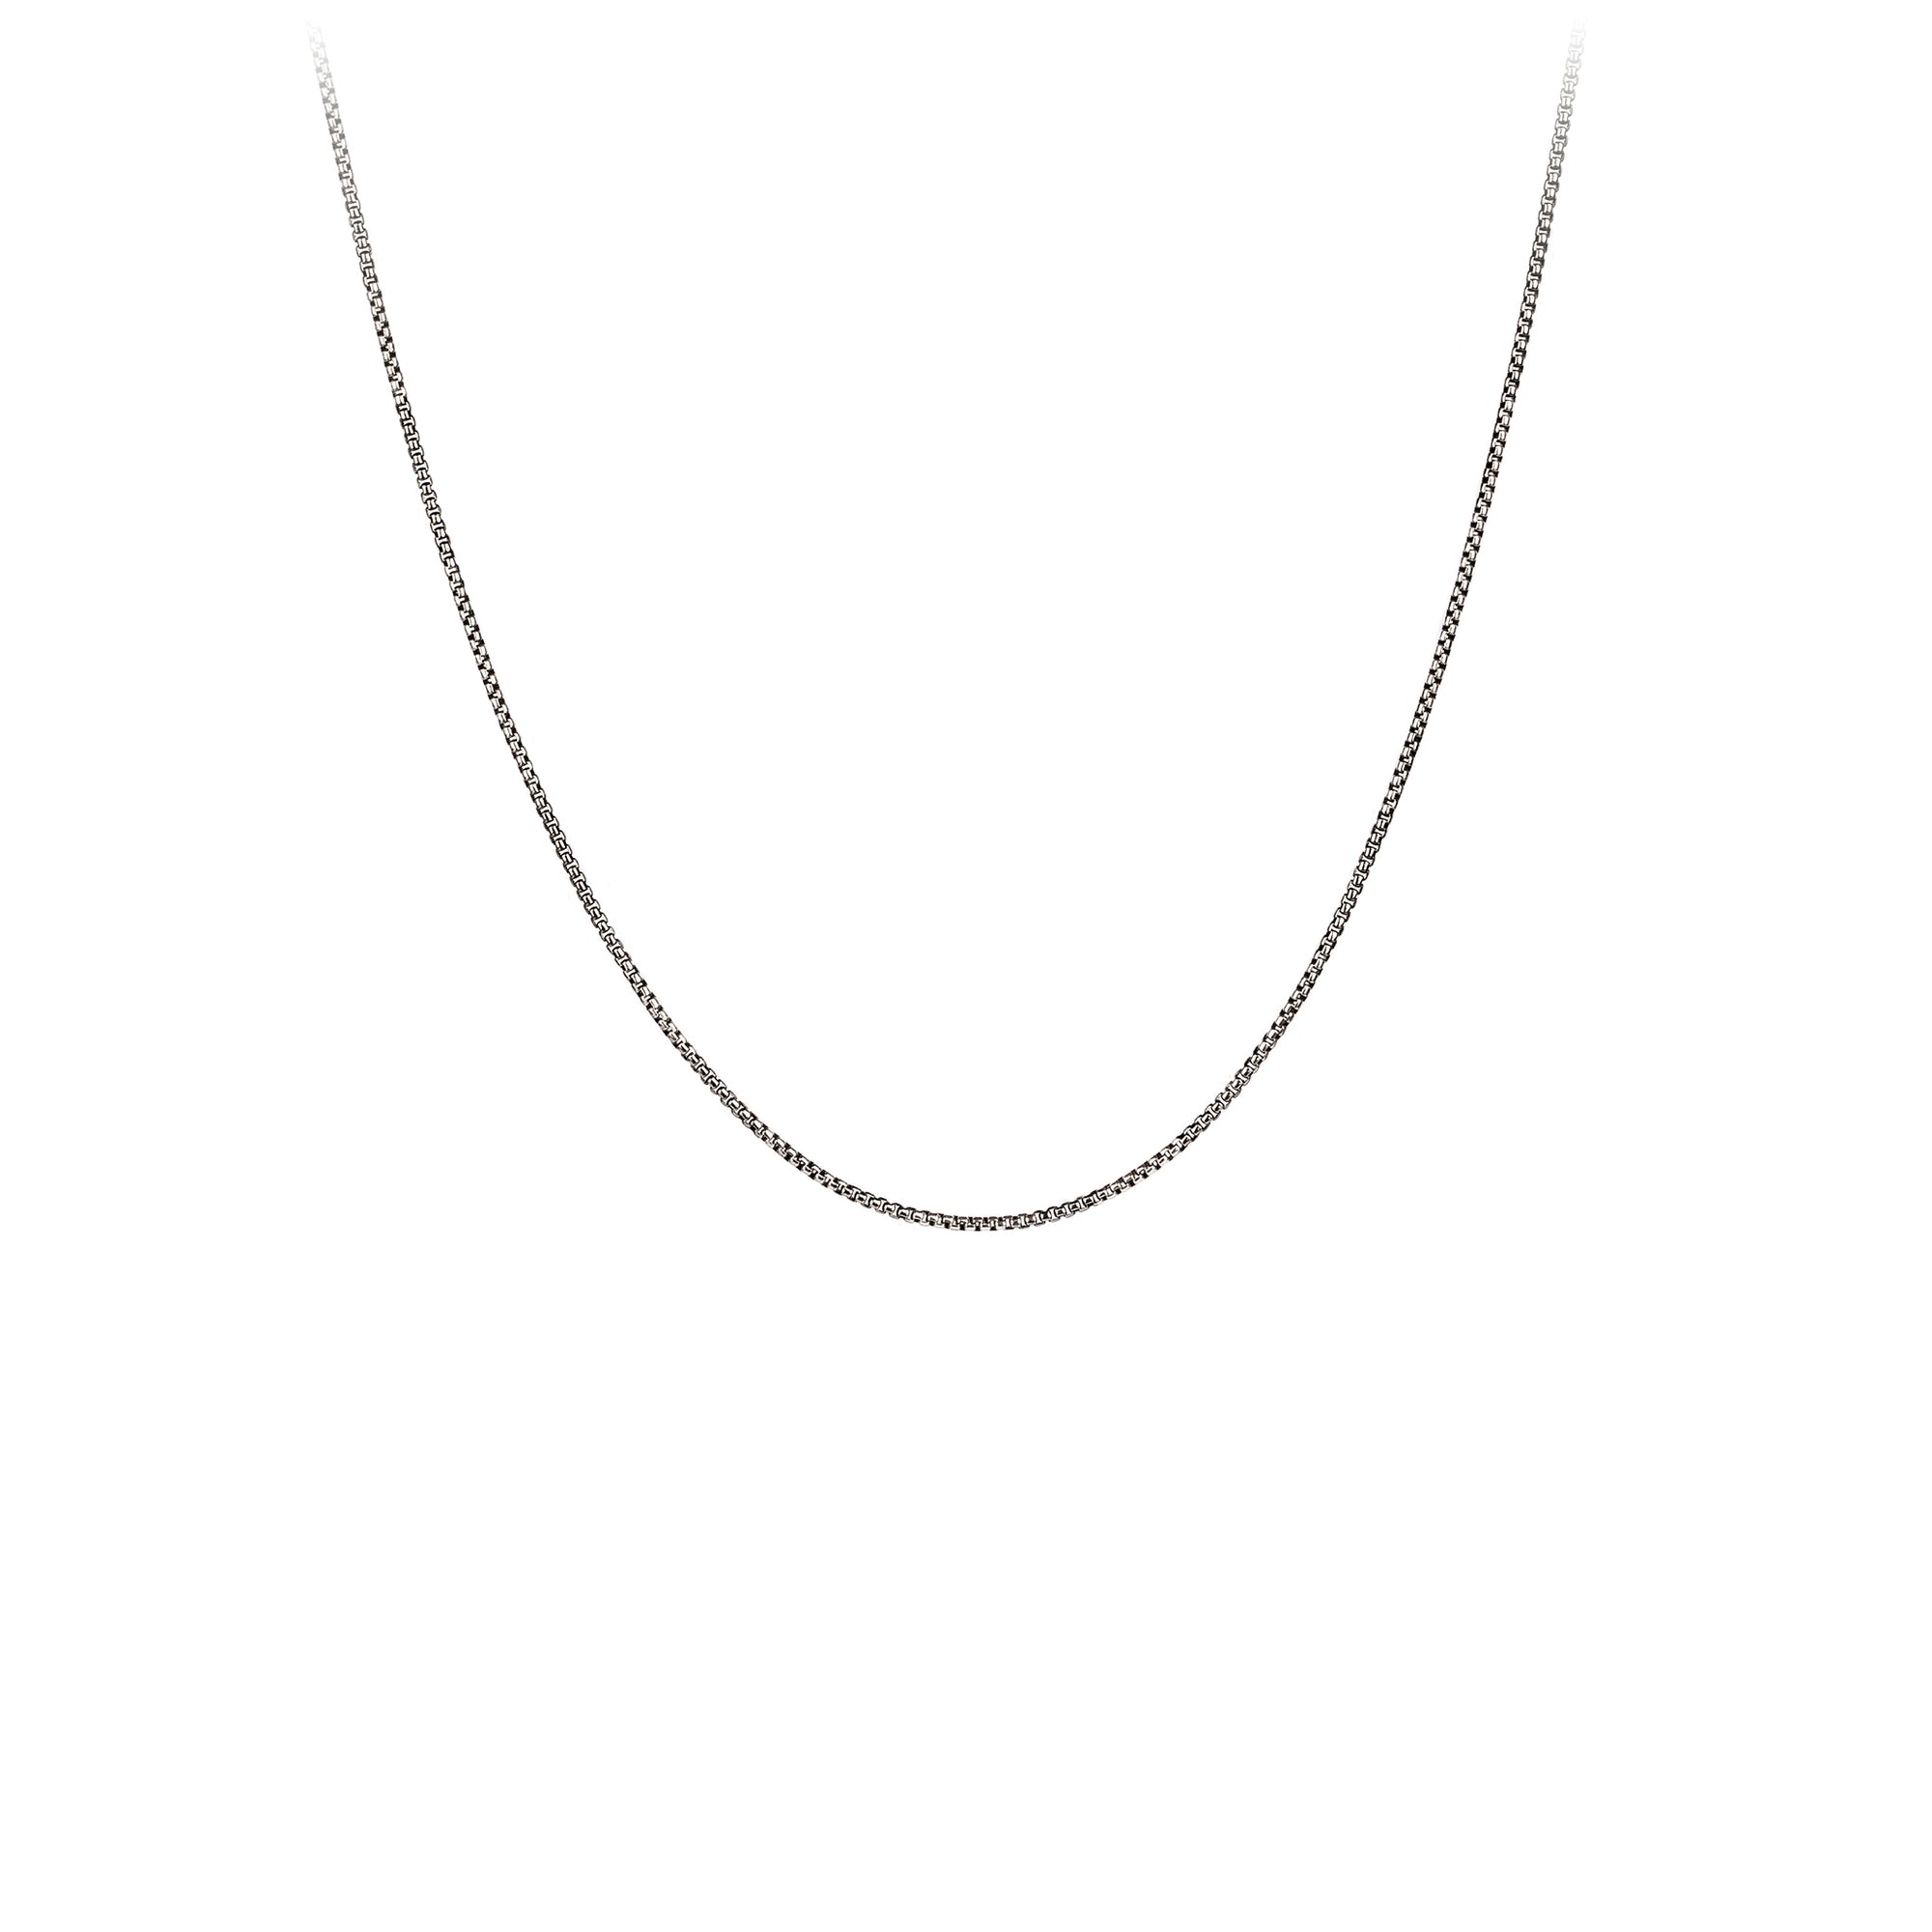 A sterling silver chain with fine round box links